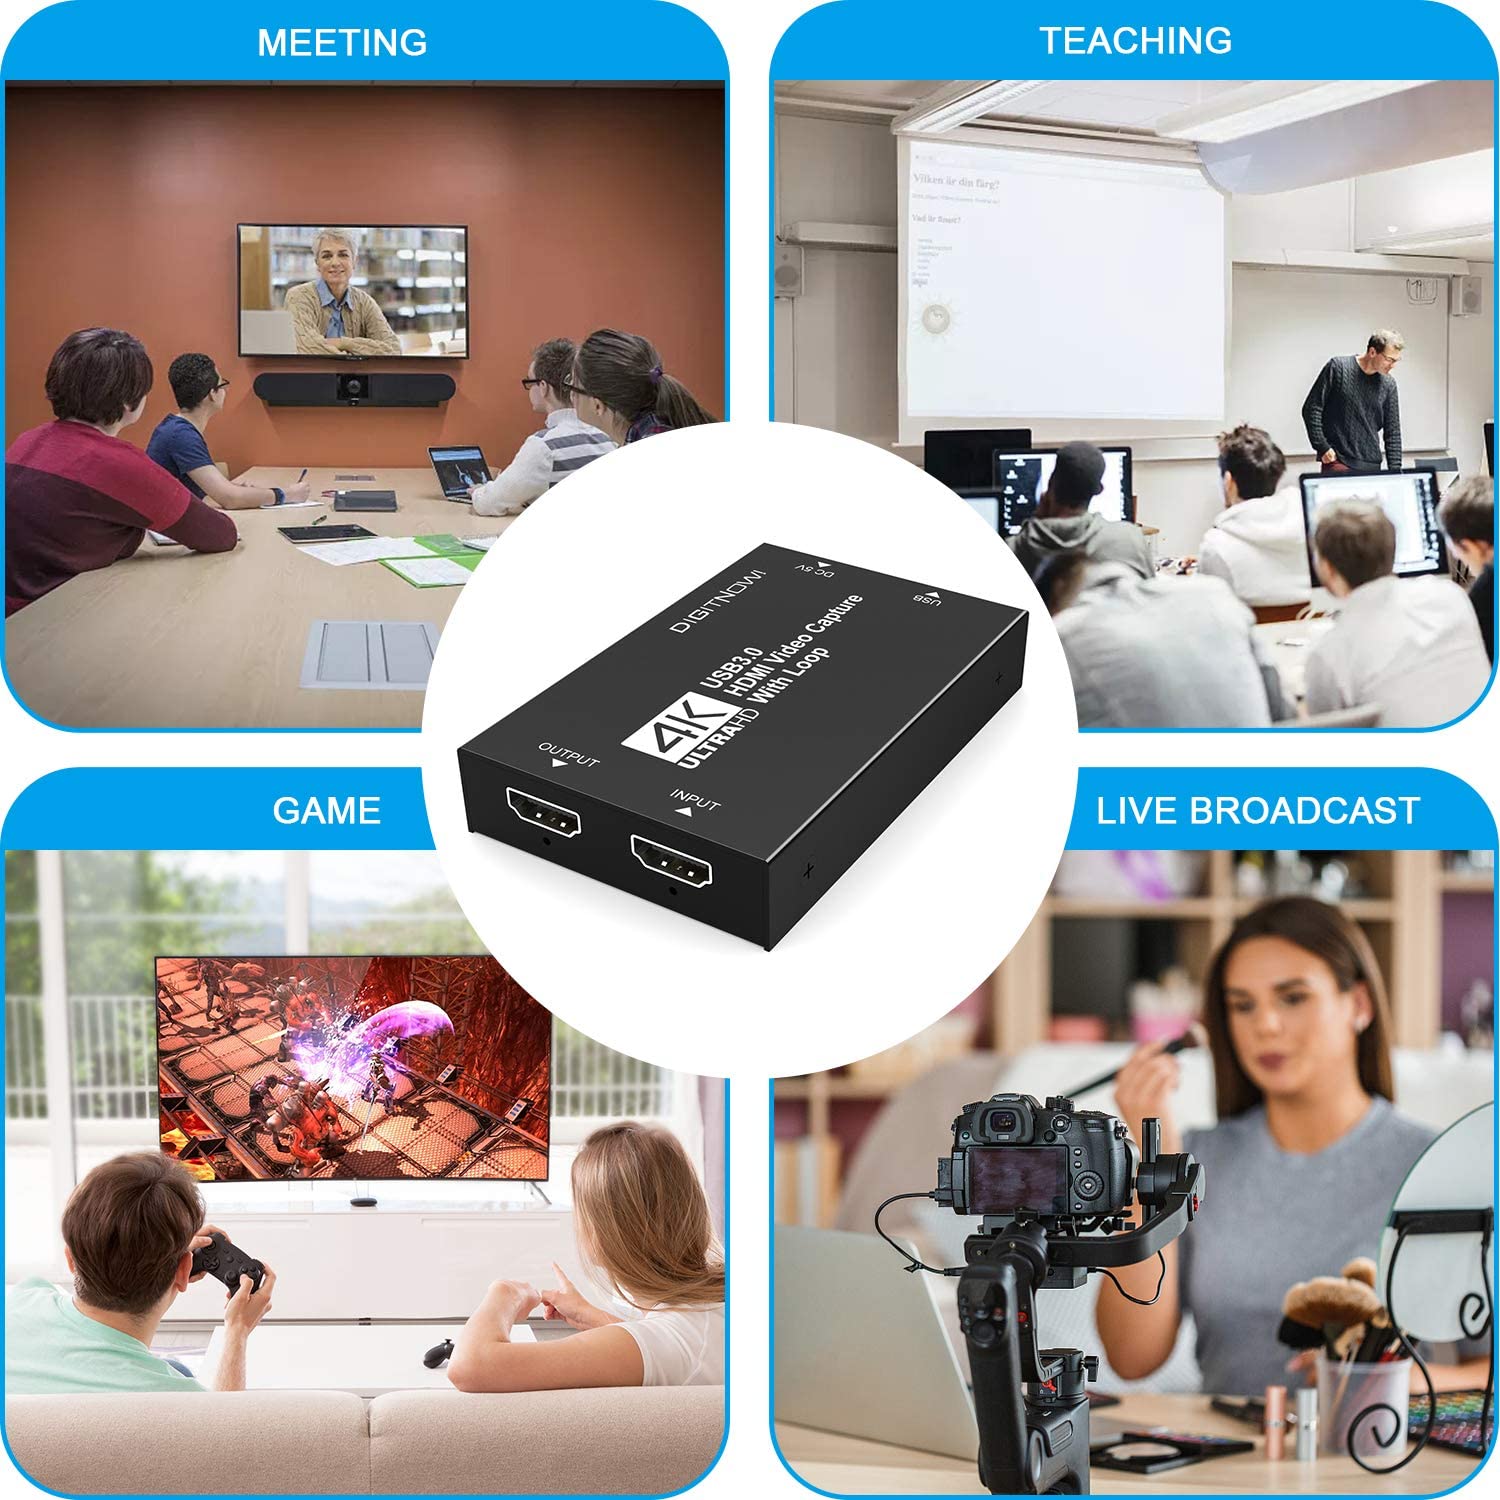 DIGITNOW! 4K HD USB 3.0 Video Capture Card with HDMI Loop-Out, 4k 60Hz No  Lag Passthrough for Video Recording,Support Capture Resolution Up to 4K  NV12